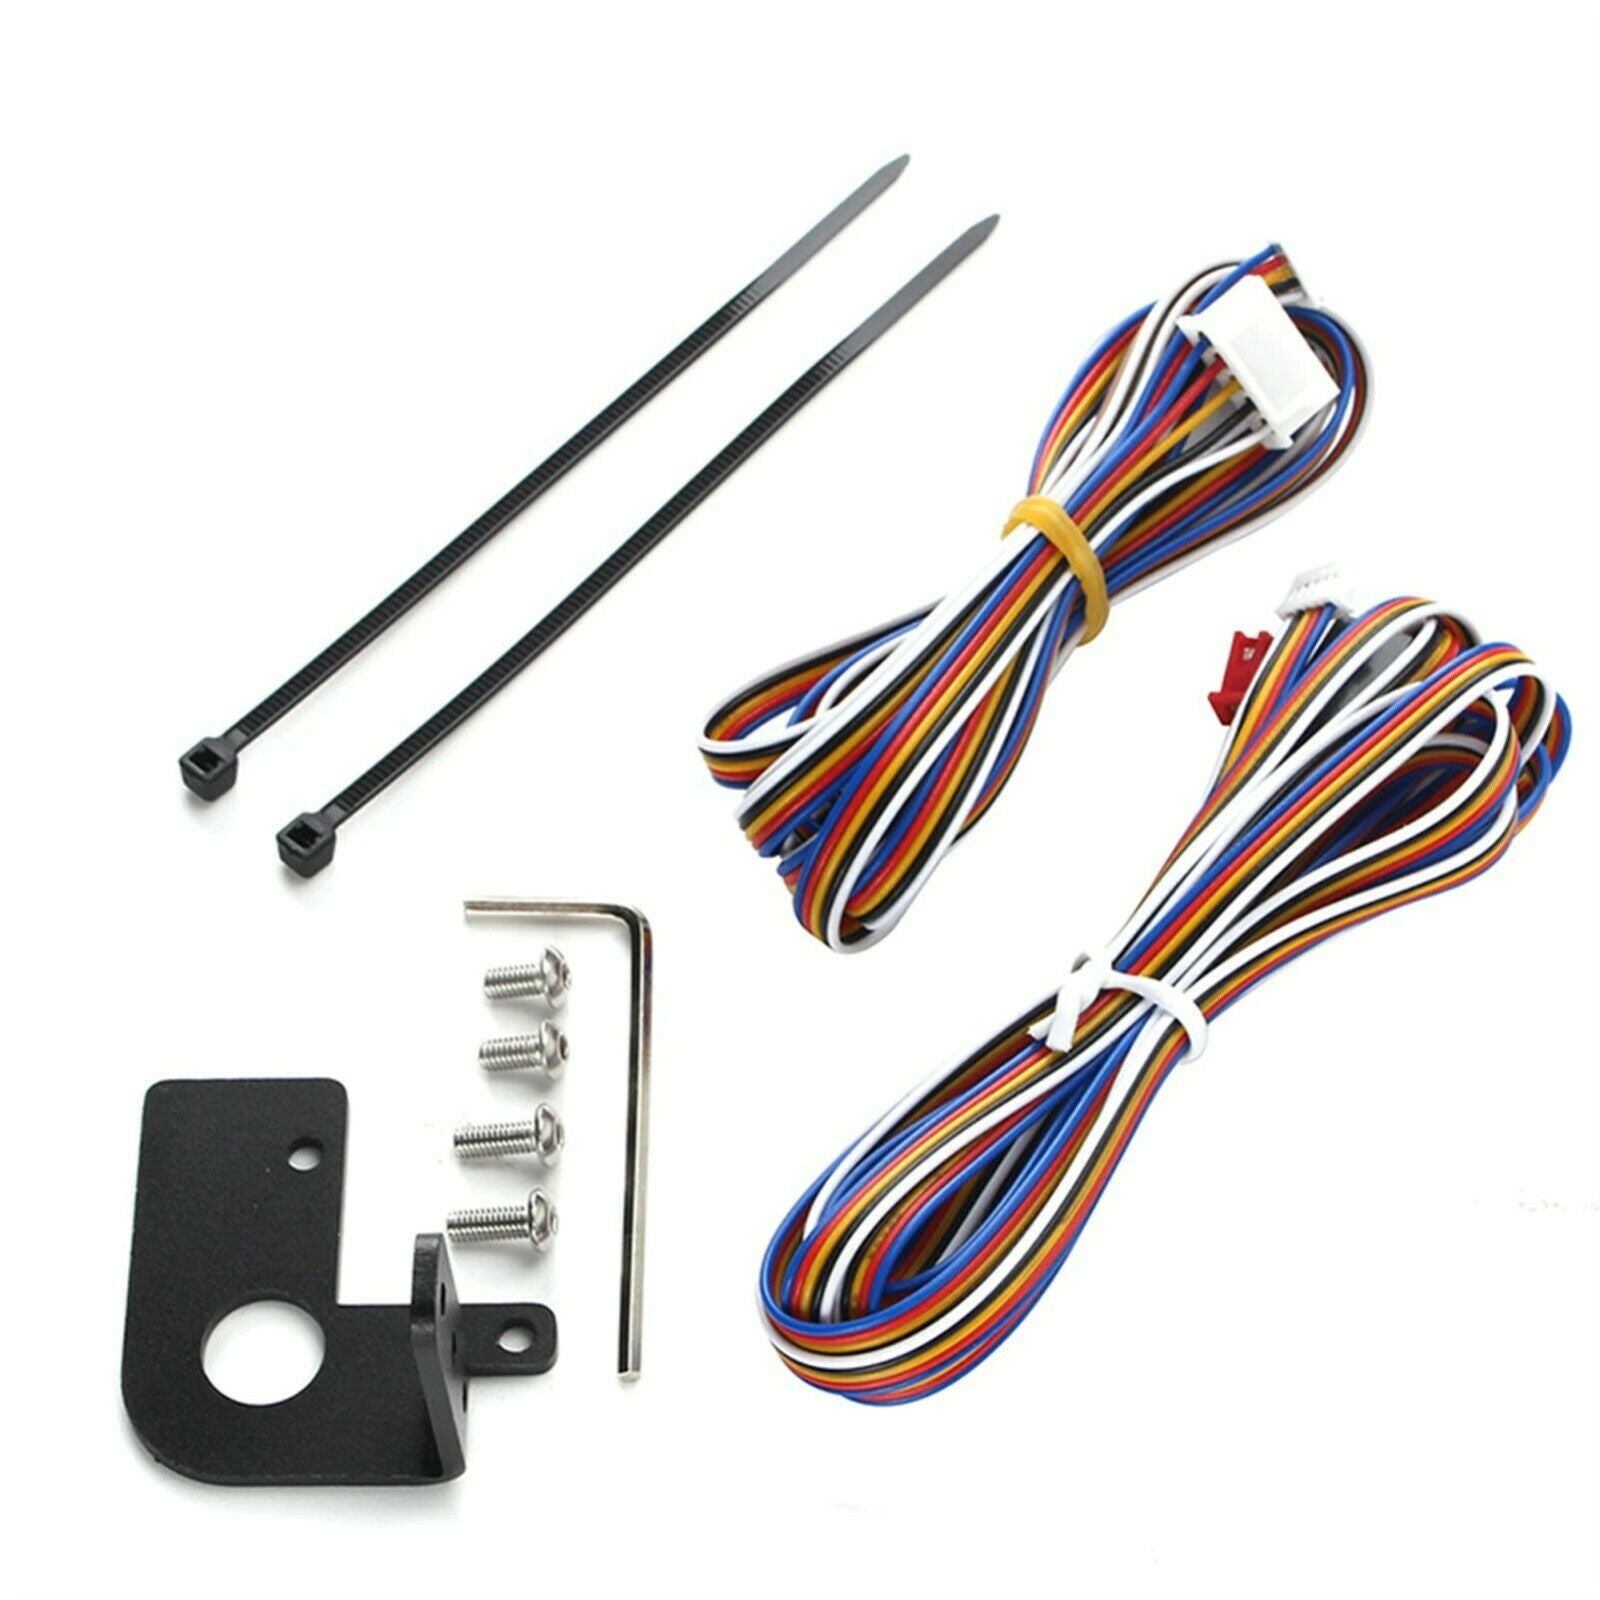 BLTouch Extension Cable Kit + Mount for Creality Ender / CR-10 Series 3D Printer